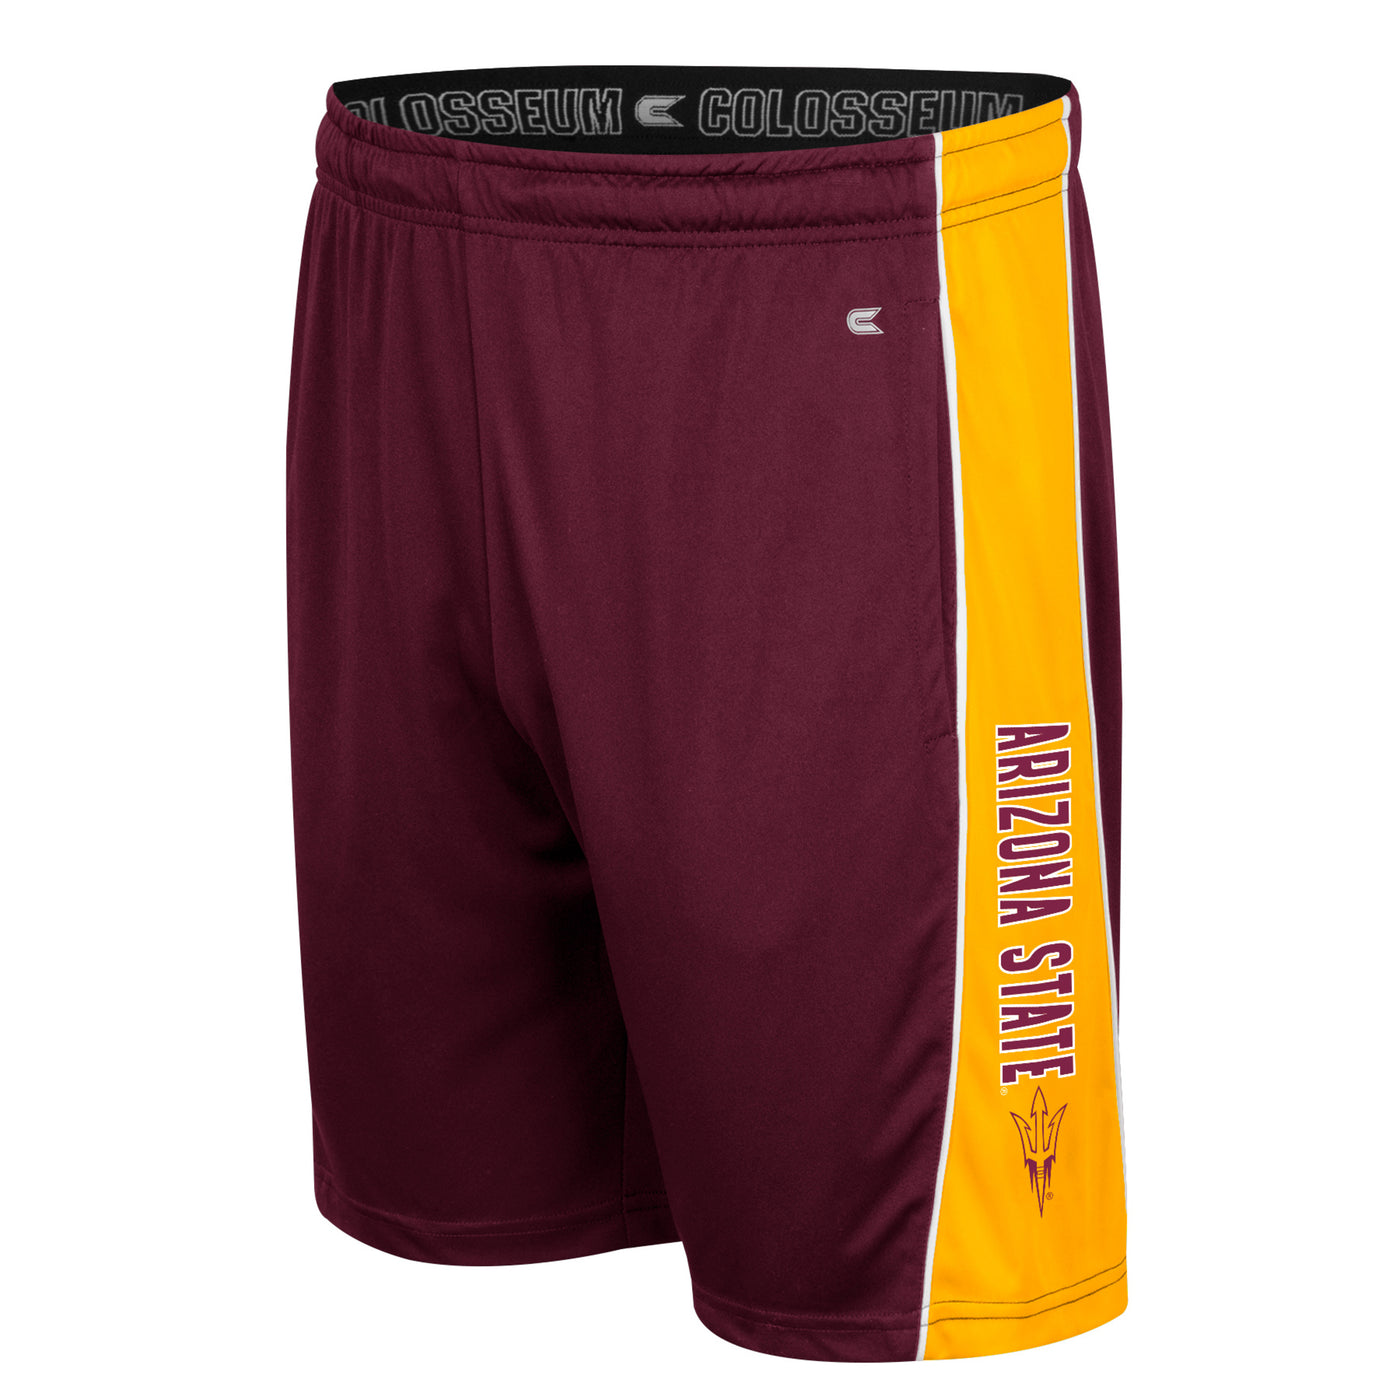 ASU mens maroon short with gold stripe on the side. 